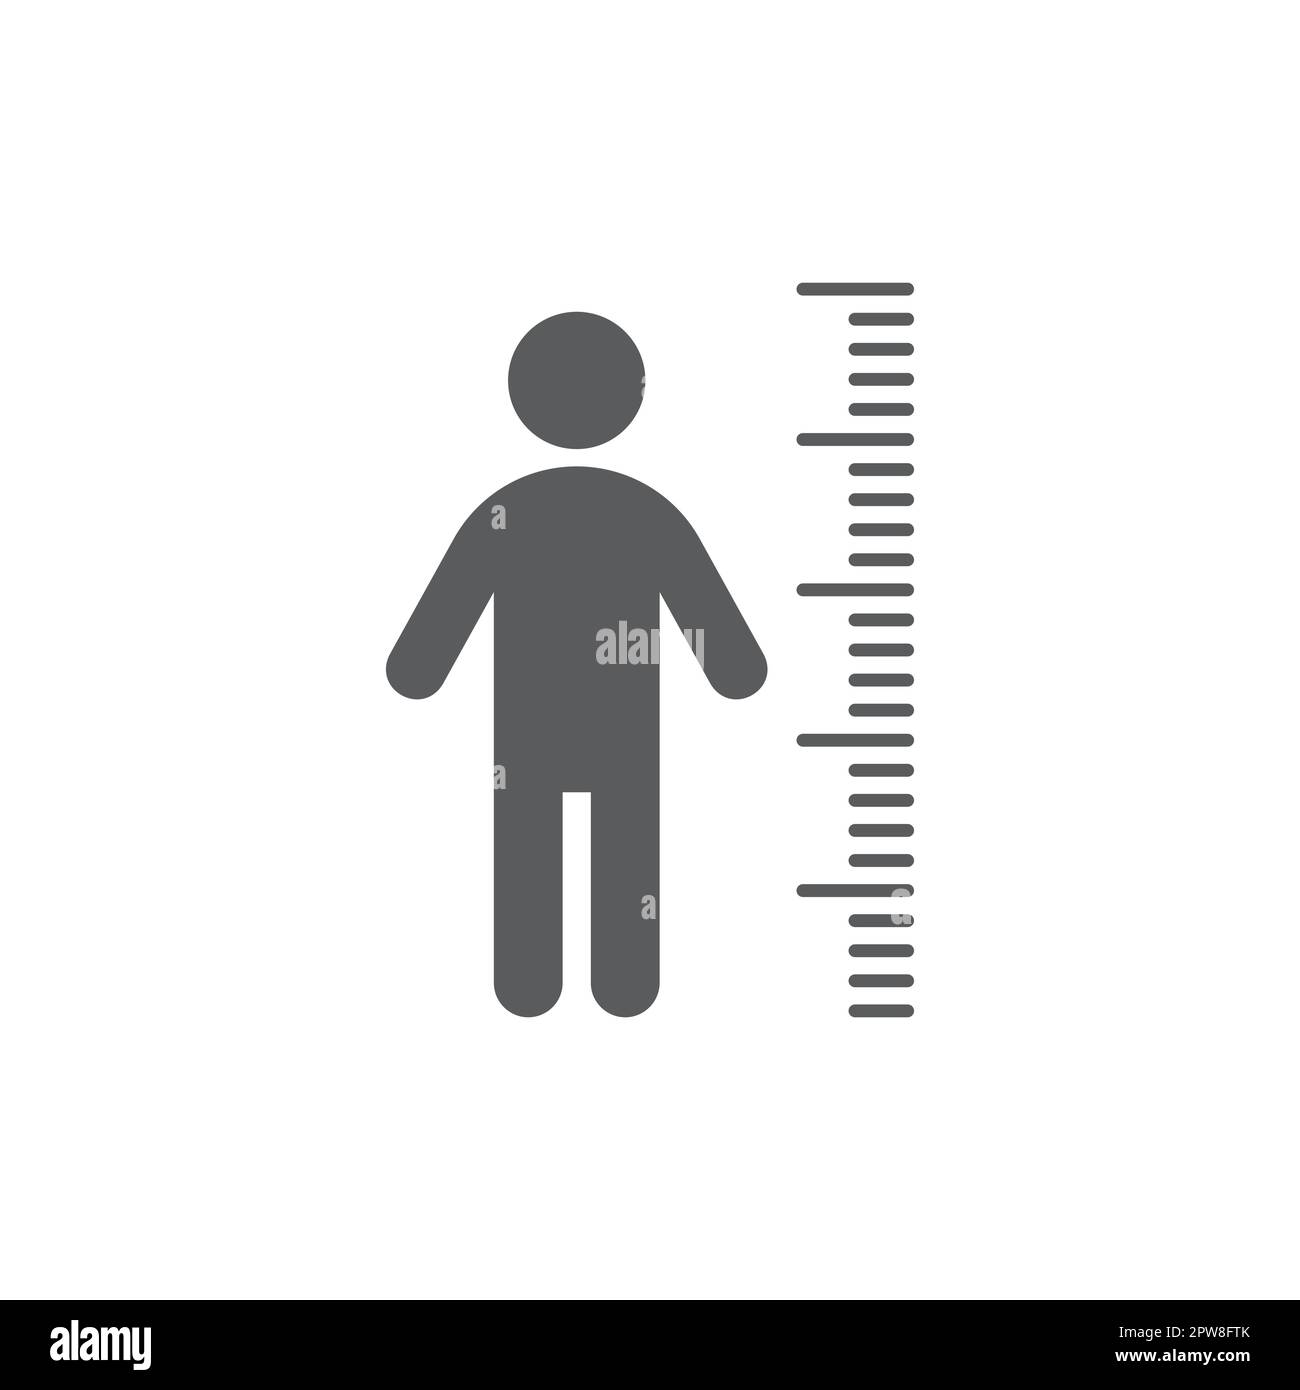 Human Height Measurement Tool in Centimeter, 0 - 140 Centimeter in Black  and White Color Isolated on White Background. Stock Illustration -  Illustration of line, growth: 121875605